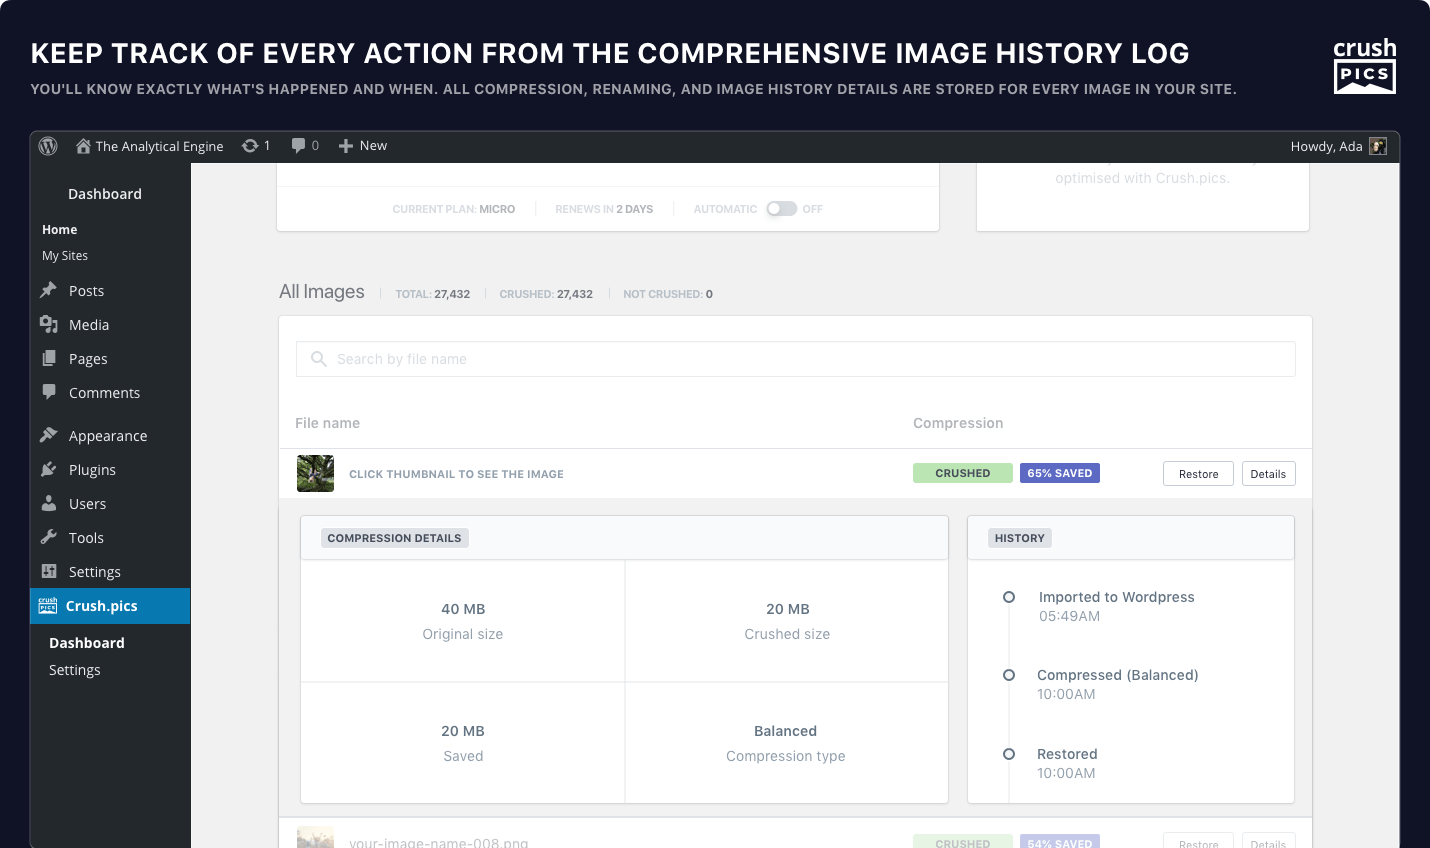 Keep track of every action from the comprehensive image history log